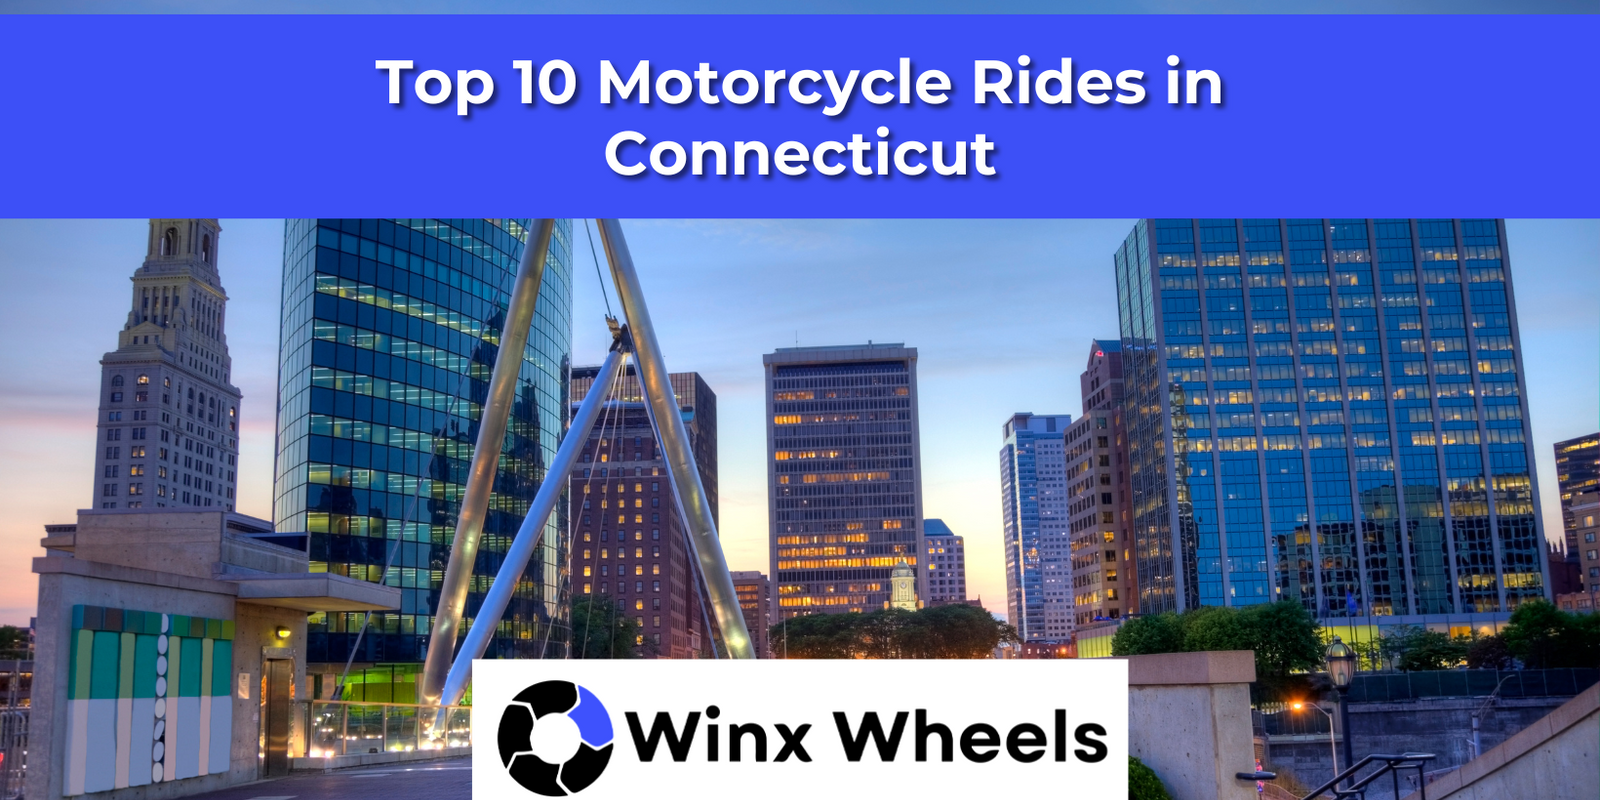 Top 10 Motorcycle Rides in Connecticut